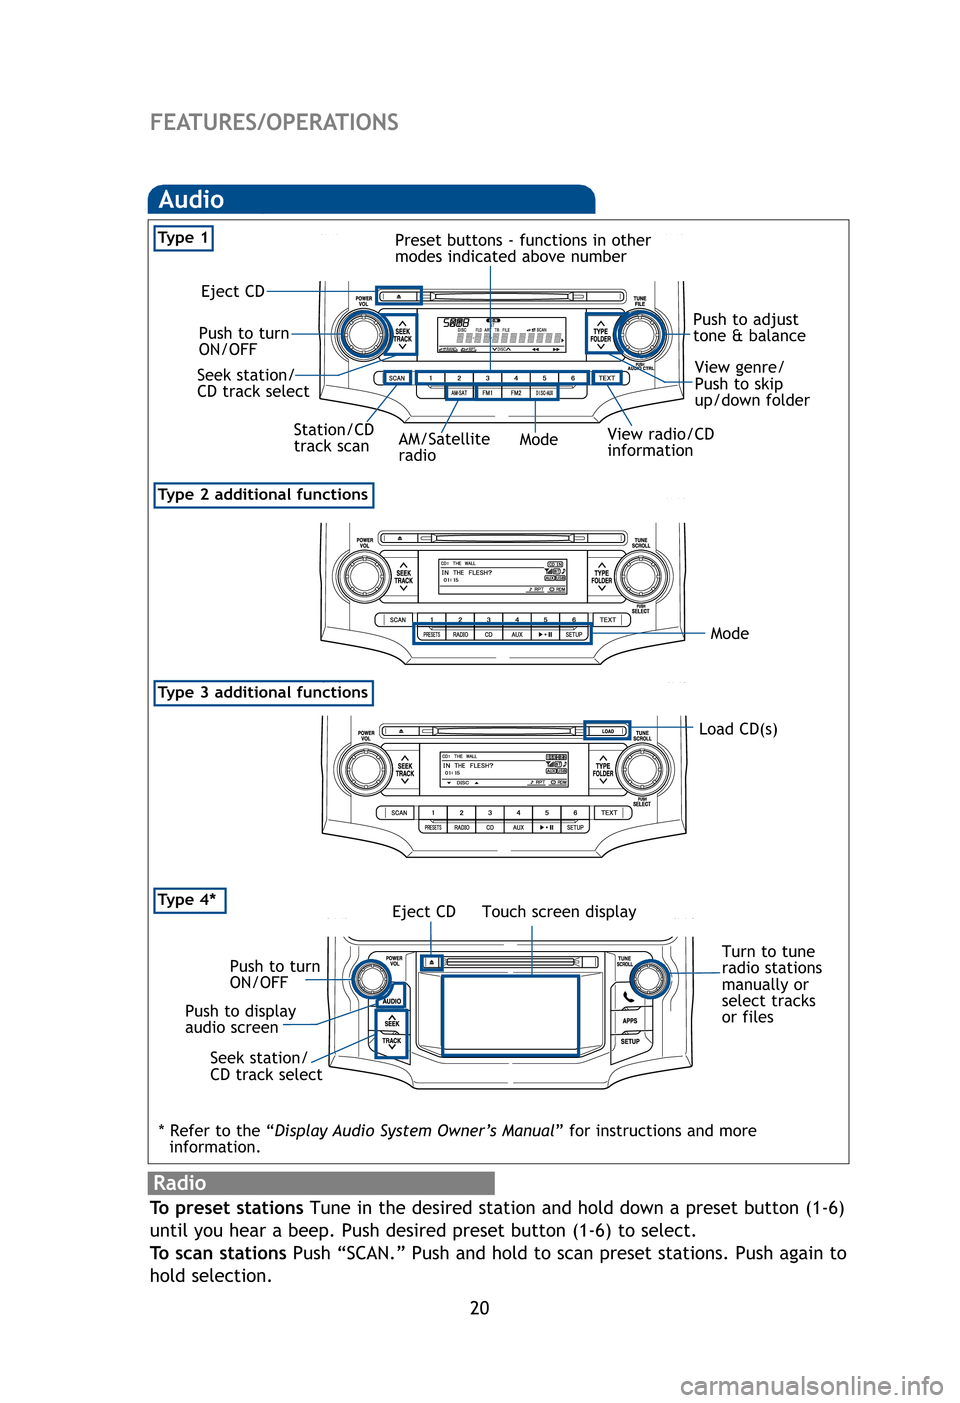 TOYOTA 4RUNNER 2012 N280 / 5.G Quick Reference Guide 20
Audio 
View radio/CD
information
Eject CD
Push to turn
ON/OFF Push to adjust
tone & balance
View genre/
Push to skip
up/down folder
Seek station/
CD track select
Station/CD
track scan Mode
Preset b